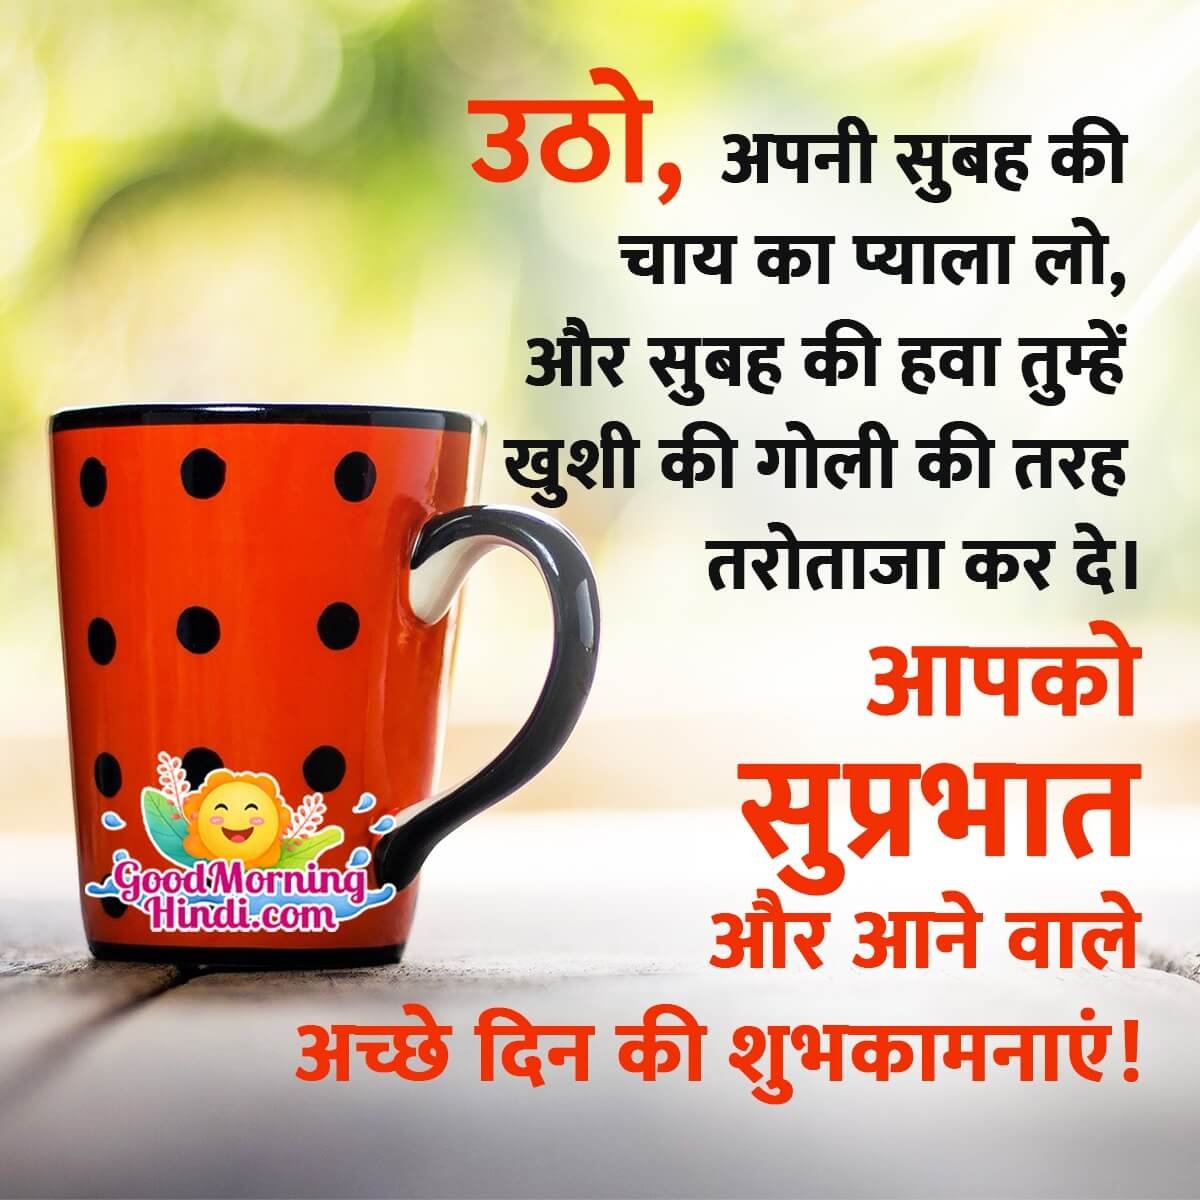 Best Good Morning Wishes In Hindi